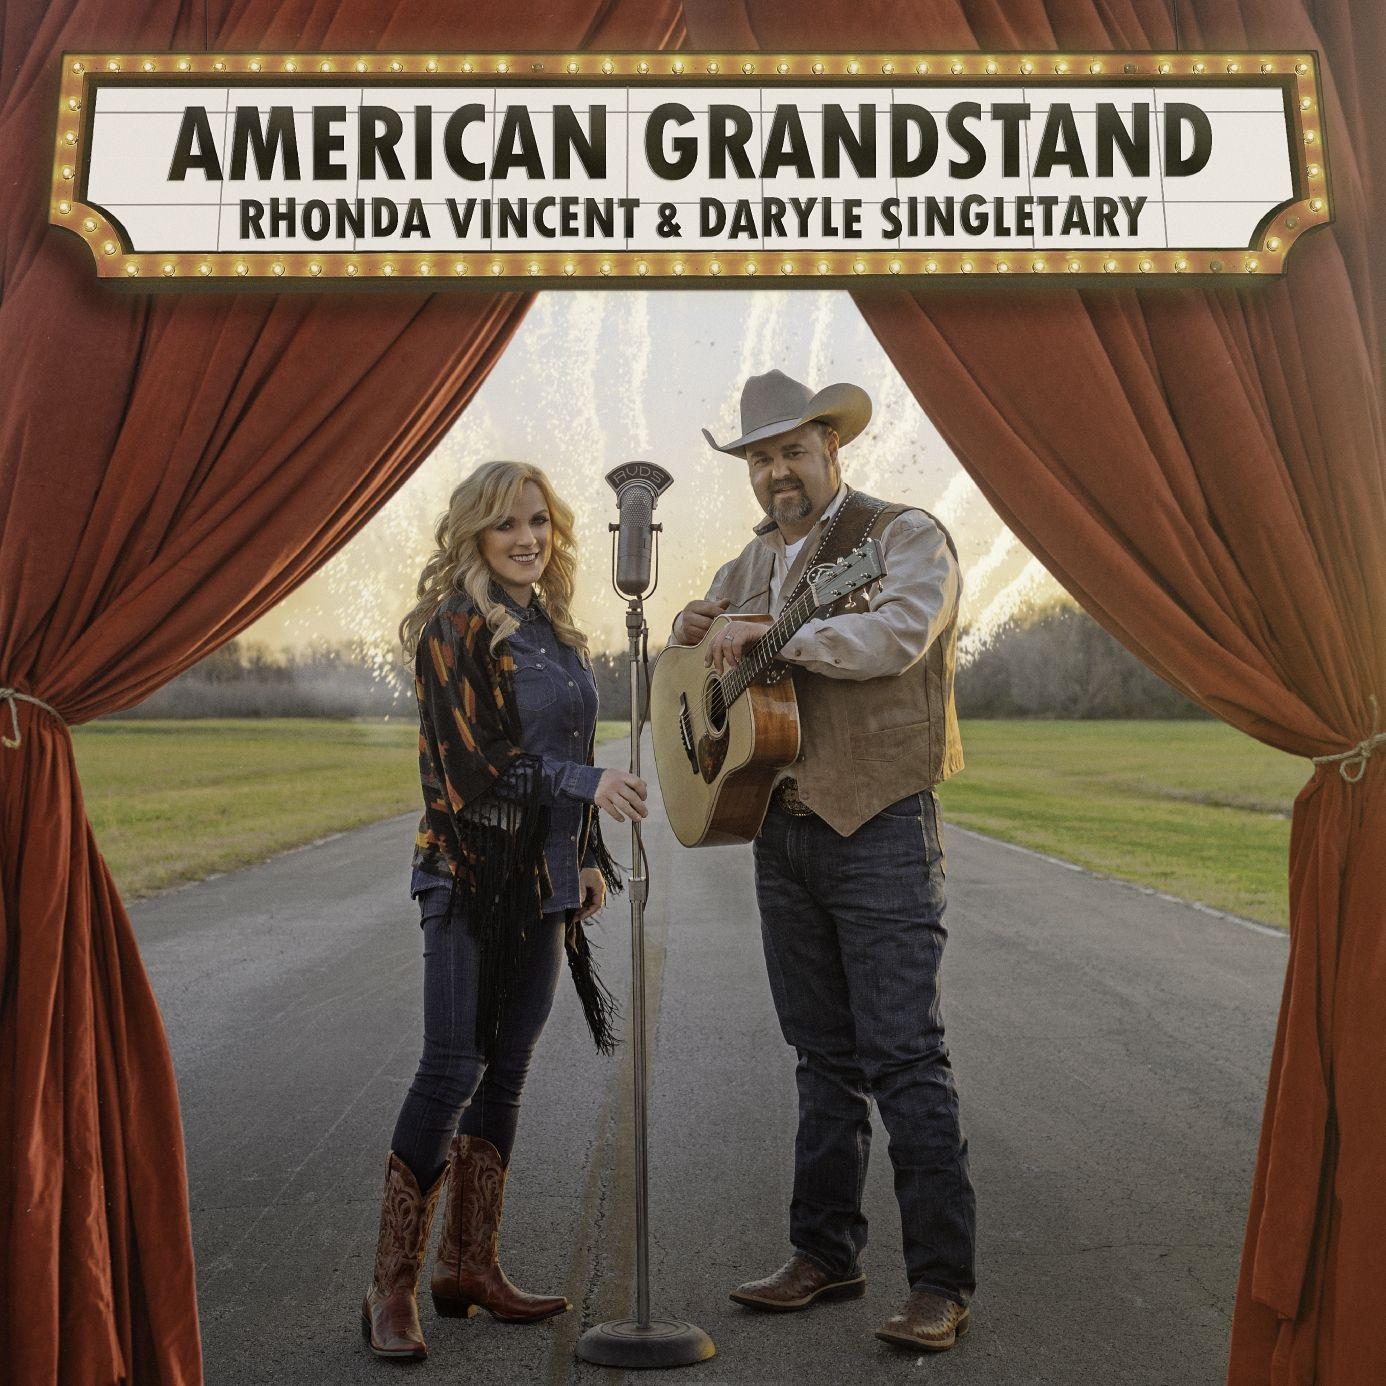 Daryle Singletary Teams Up with Rhonda Vincent for New No. 1 Album